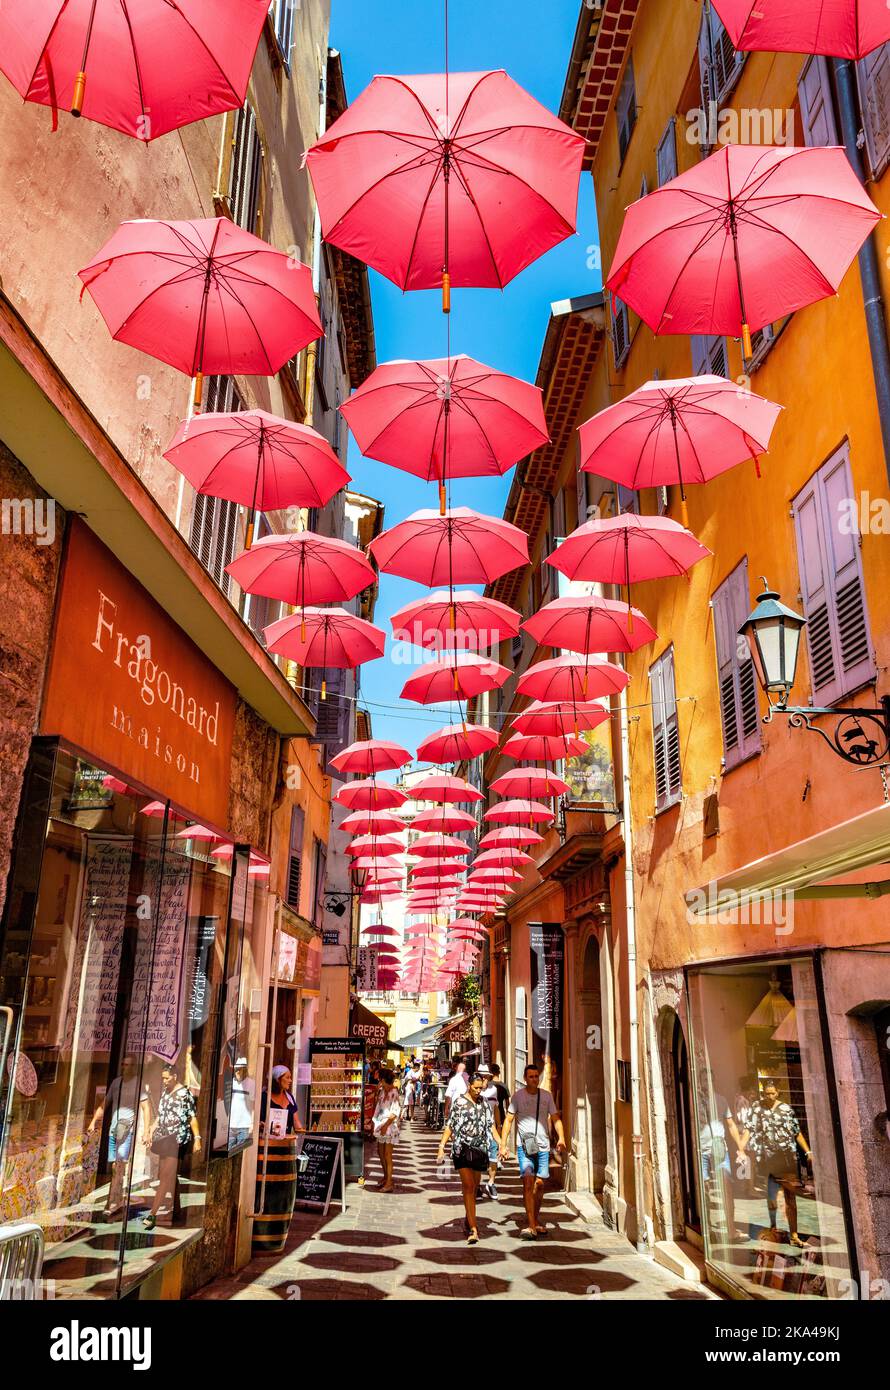 Grasse, France - August 6, 2022: Historic tenement houses and narrow streets decorated with pink umbrellas of old town quarter of perfumery city Stock Photo